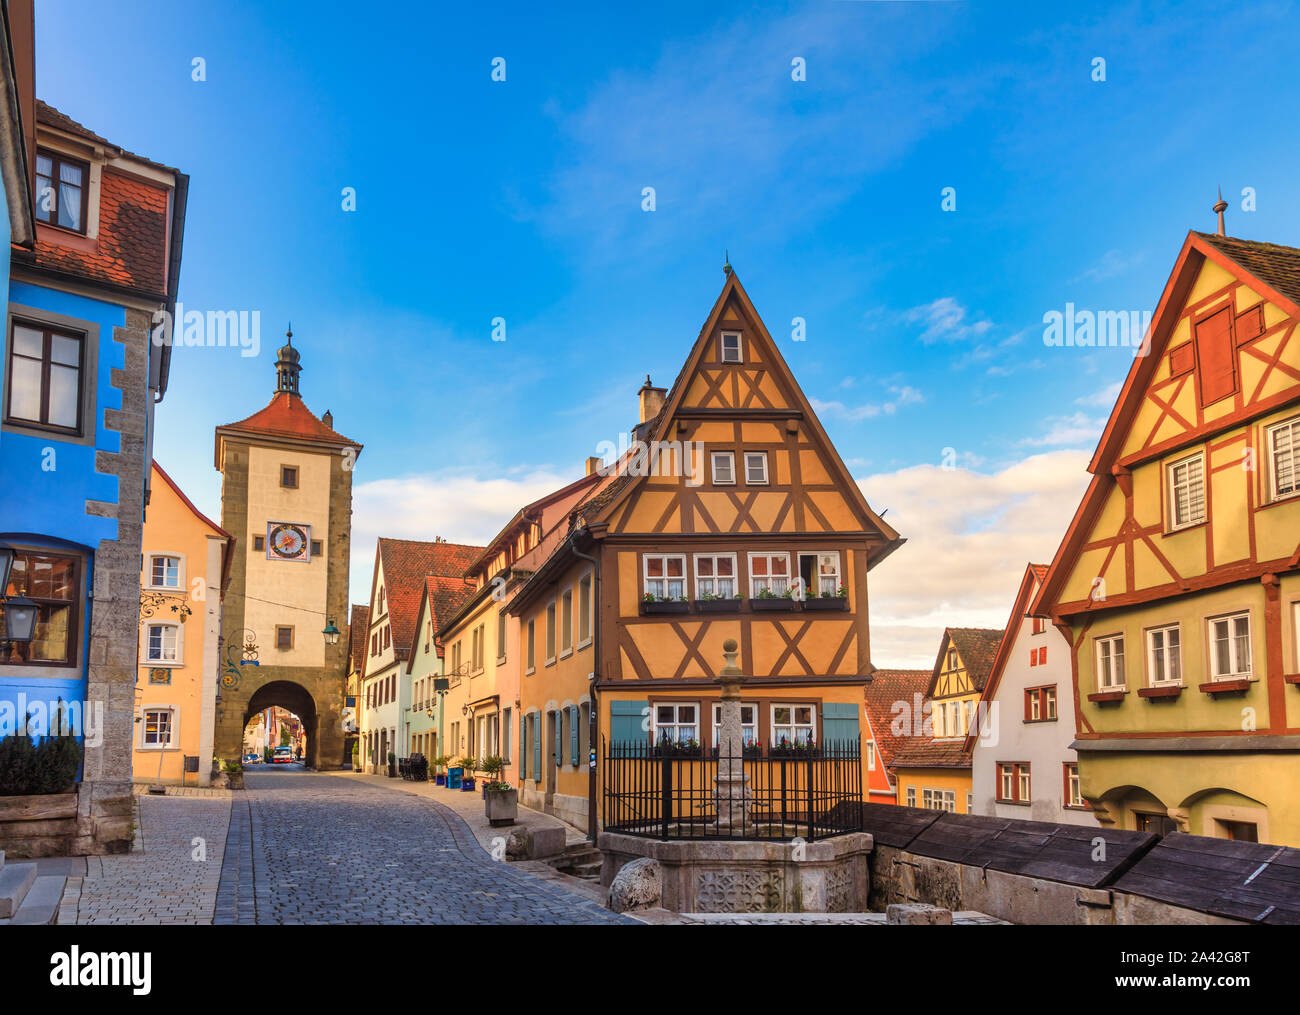 Classic view of picturesque Plonlein (Little Square) in Rothenburg ob der Tauber, Bavaria, Germany, Europe, one of the most popular travel destination Stock Photo